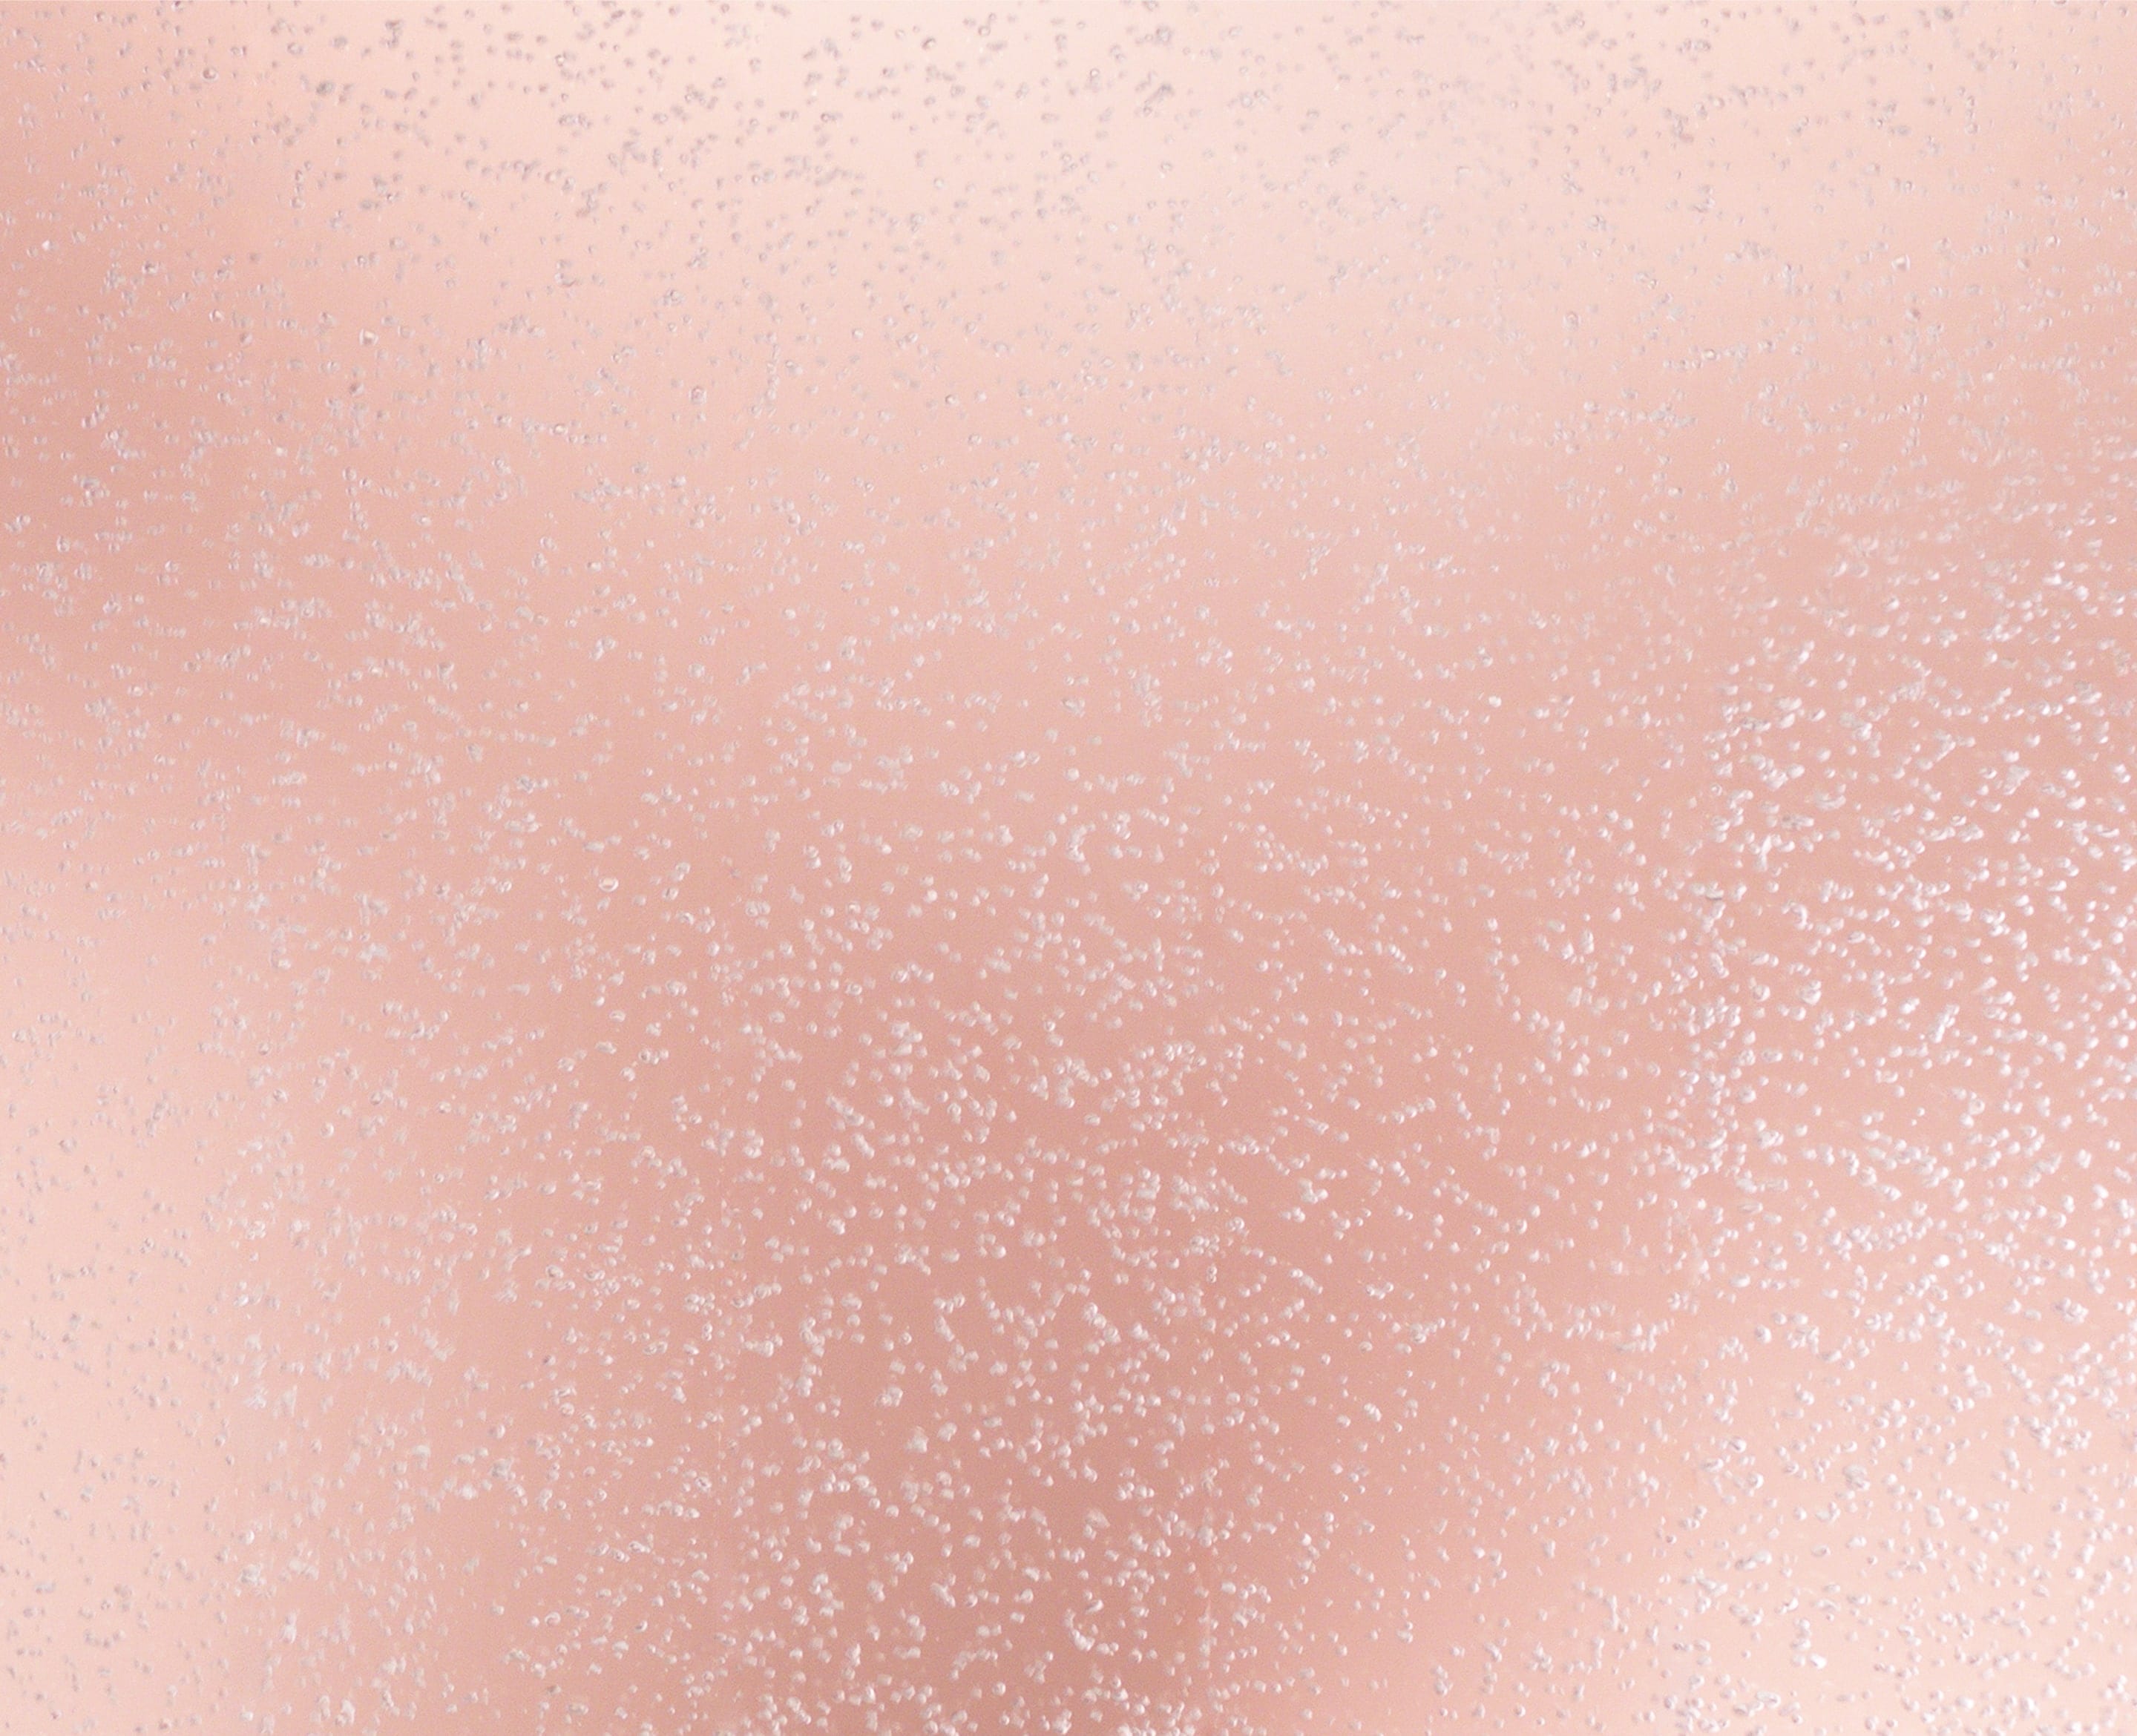 Background image containing bubbles over a soft pink background